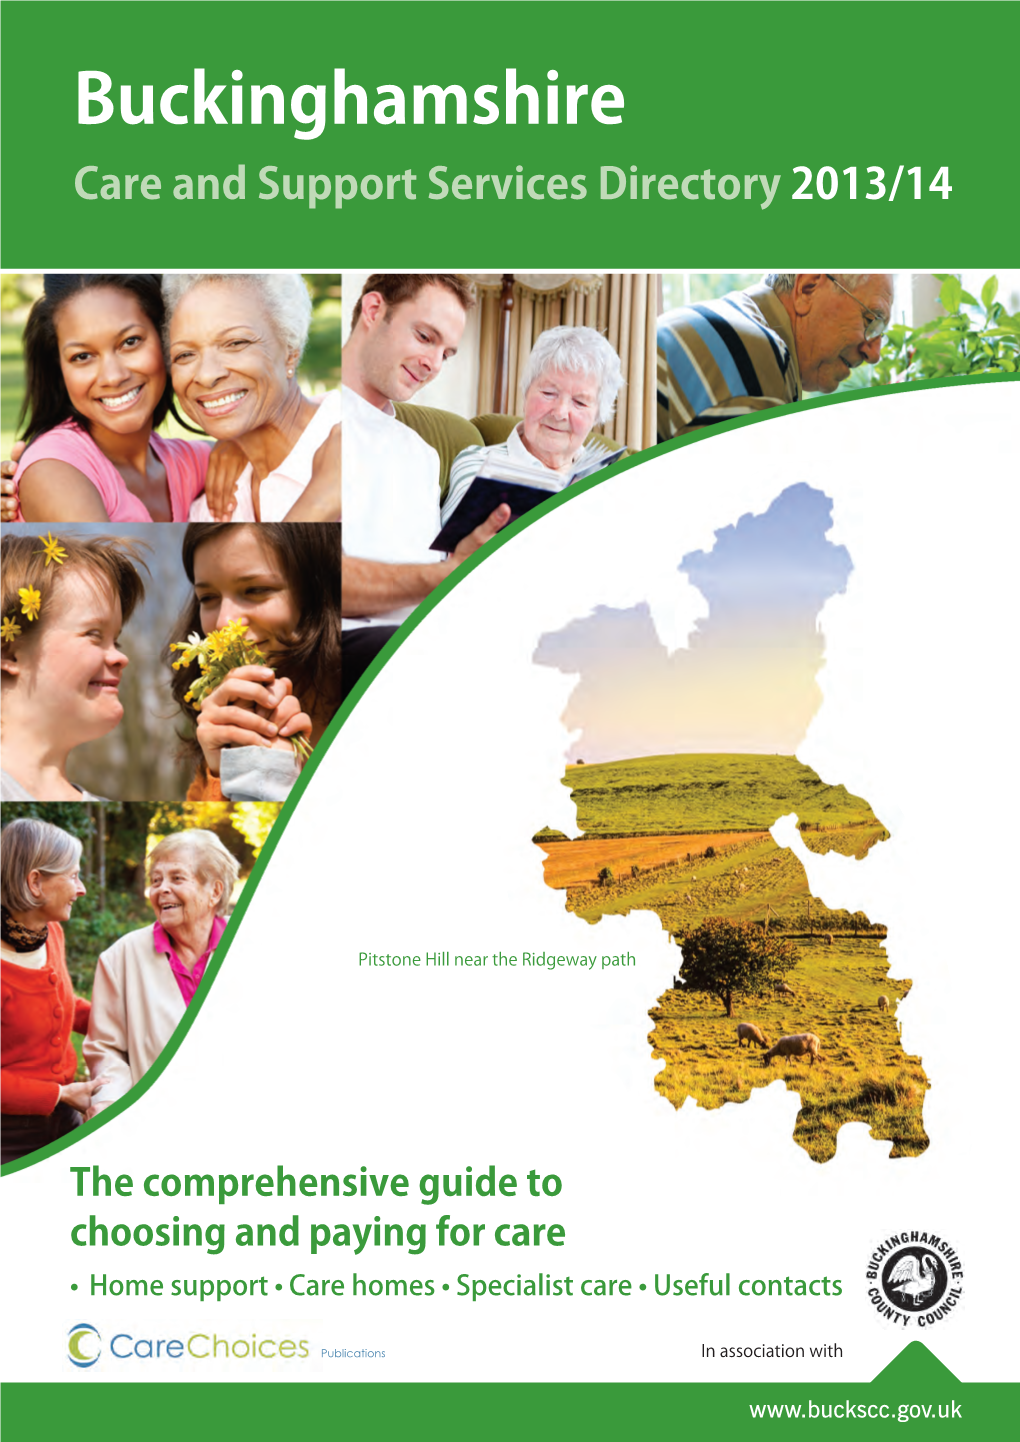 Buckinghamshire Care and Support Services Directory 2013/14